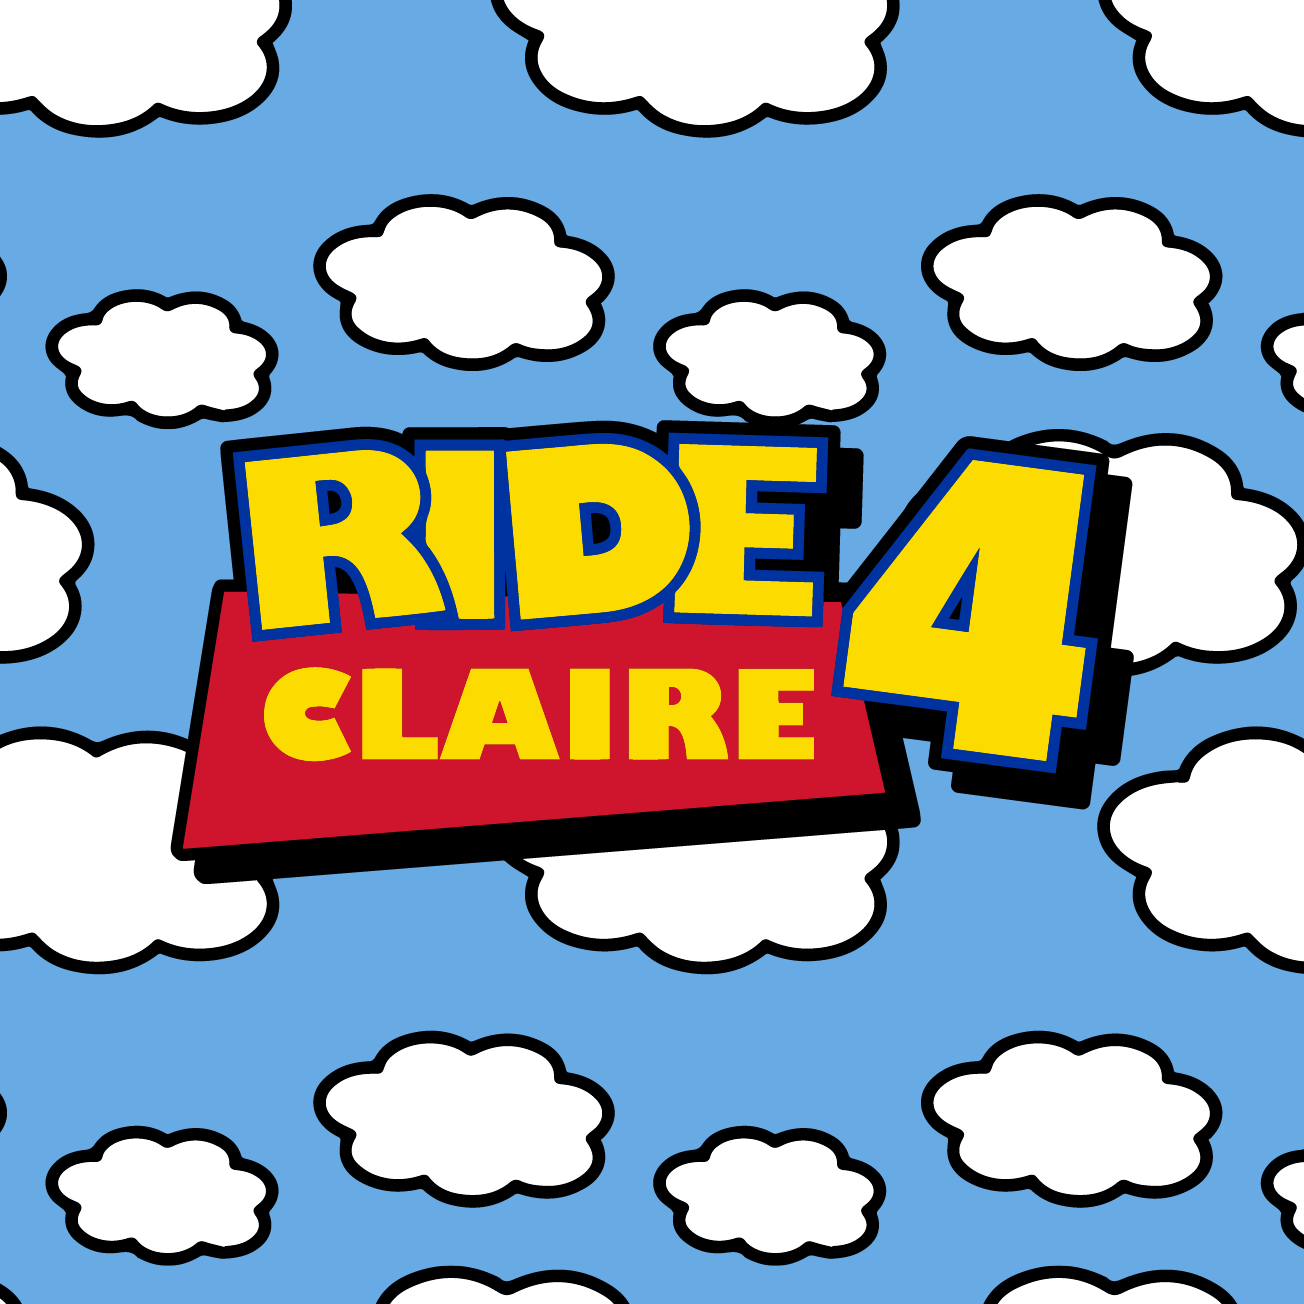 Club Image for RIDE 4 CLAIRE